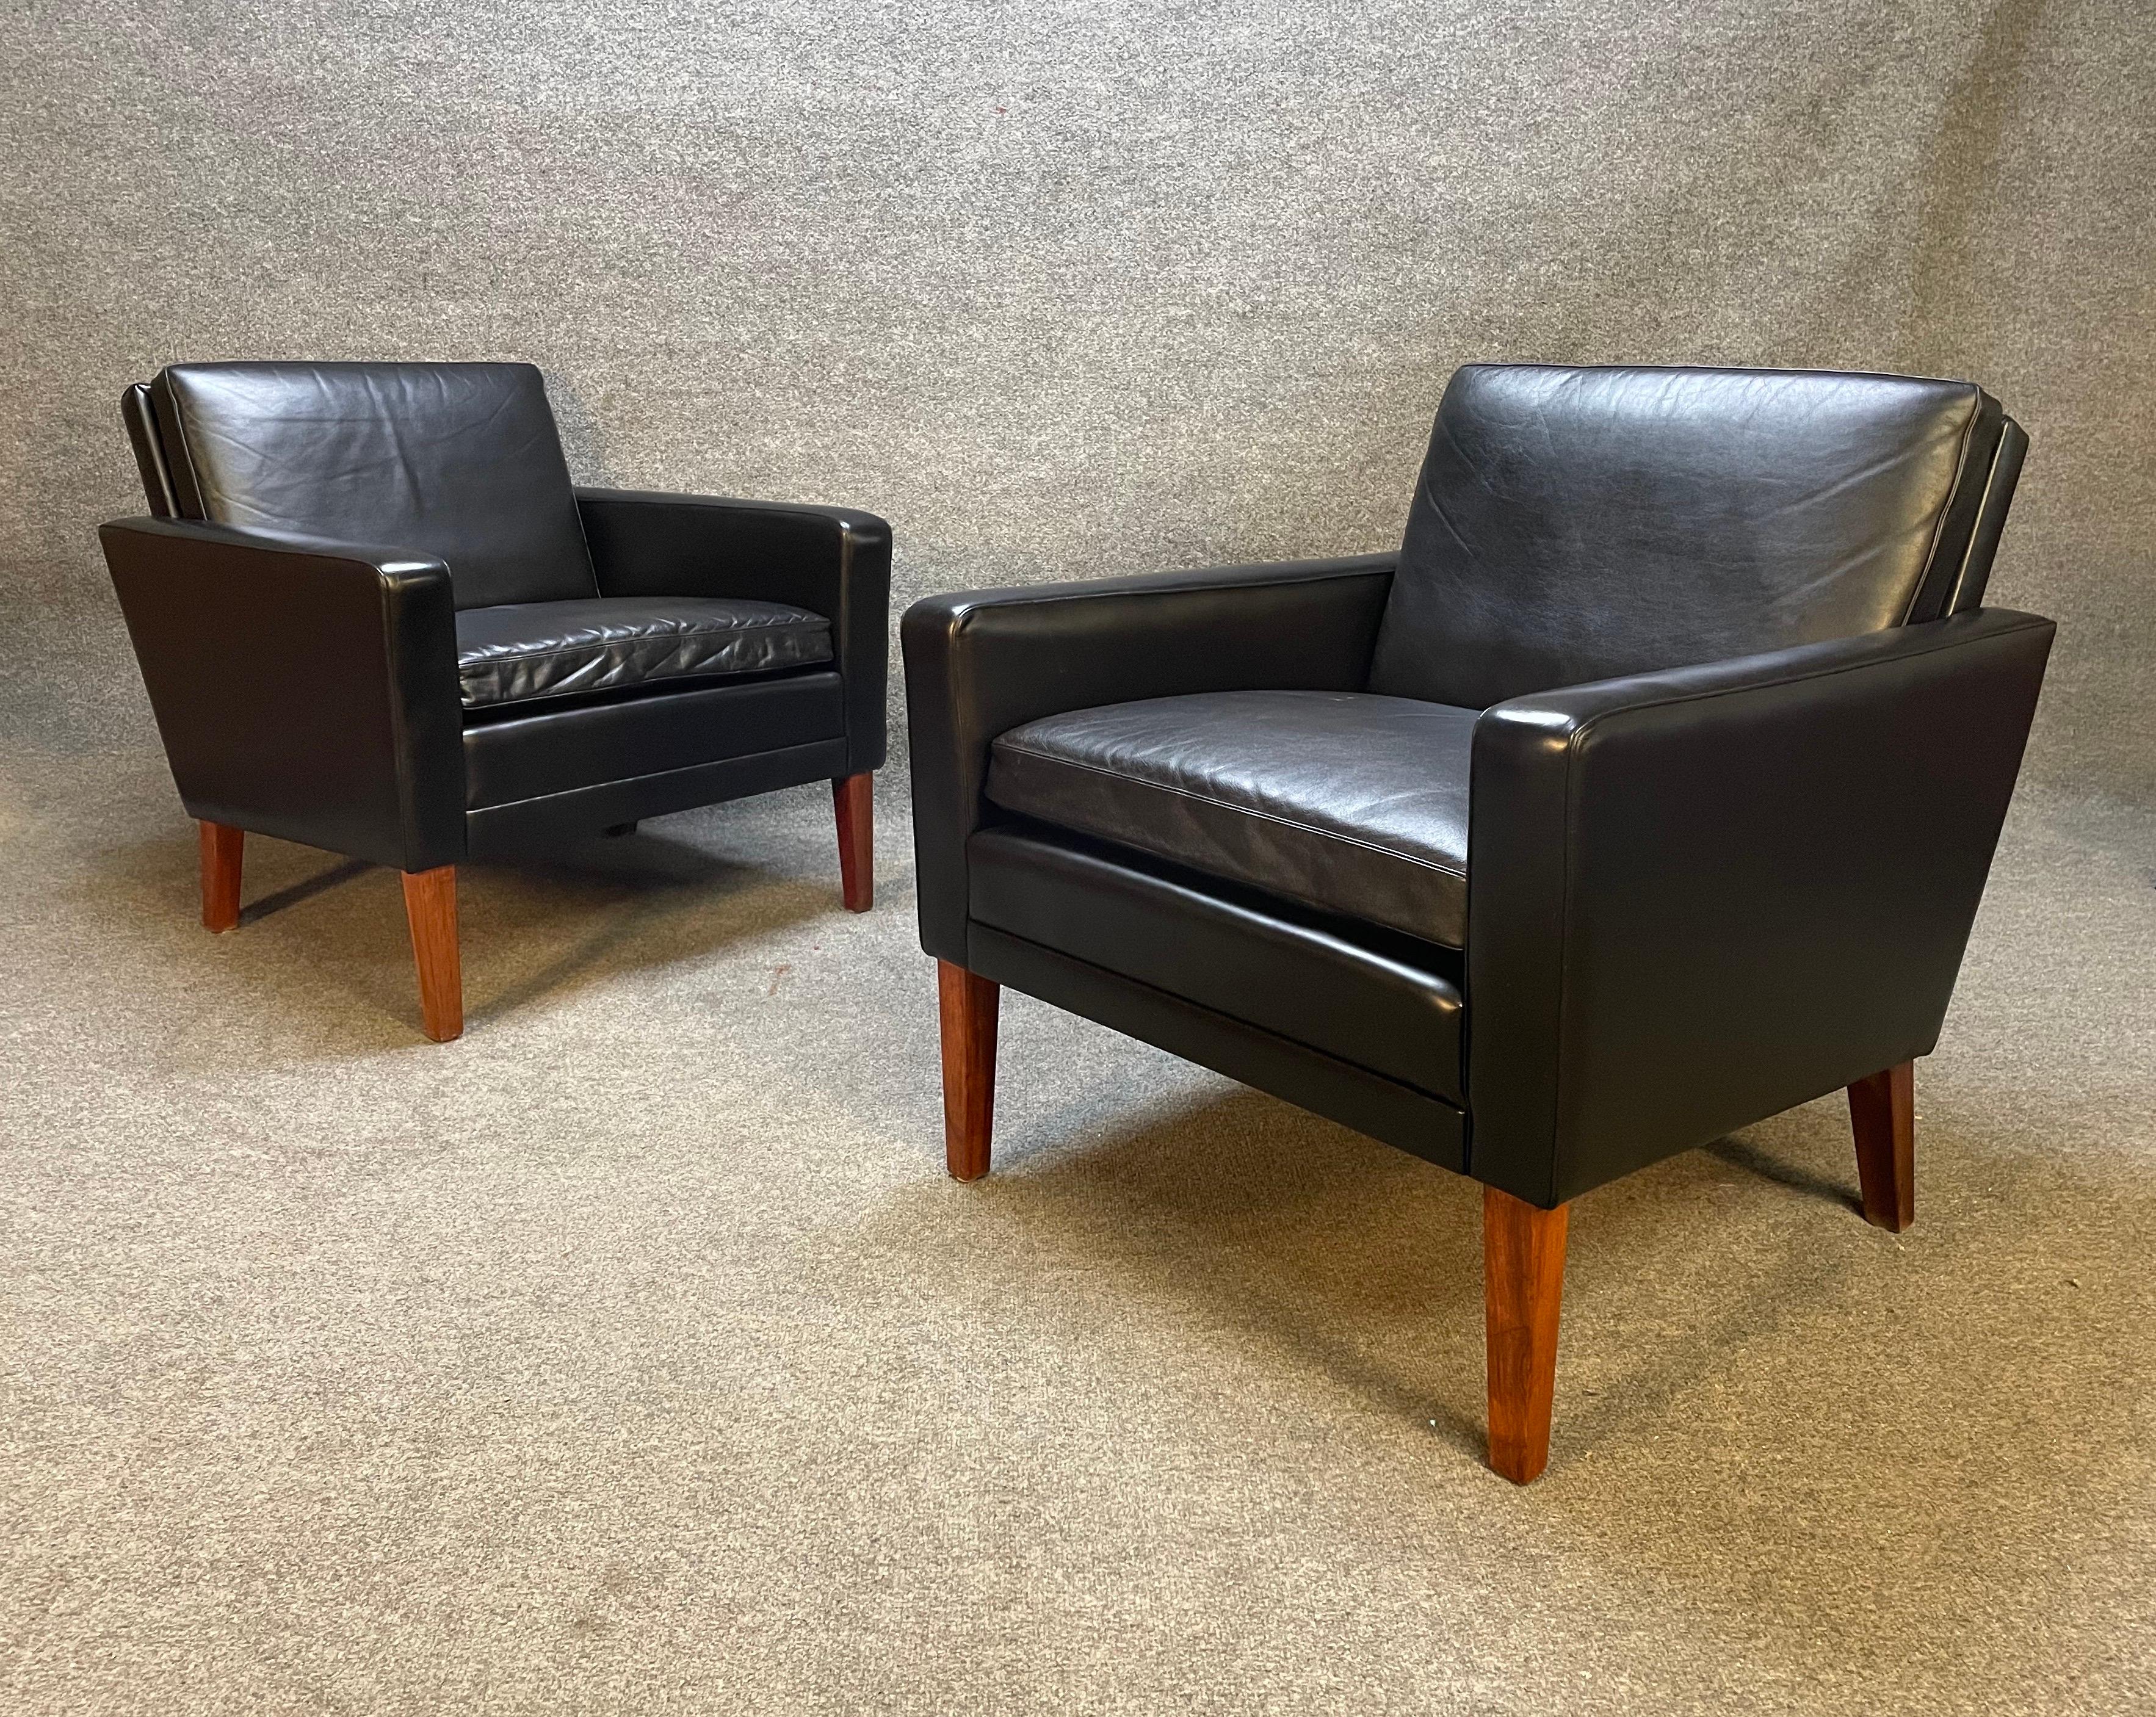 Scandinavian Modern Pair of Vintage Danish Mid-Century Modern Club Chairs in Leather and Rosewood